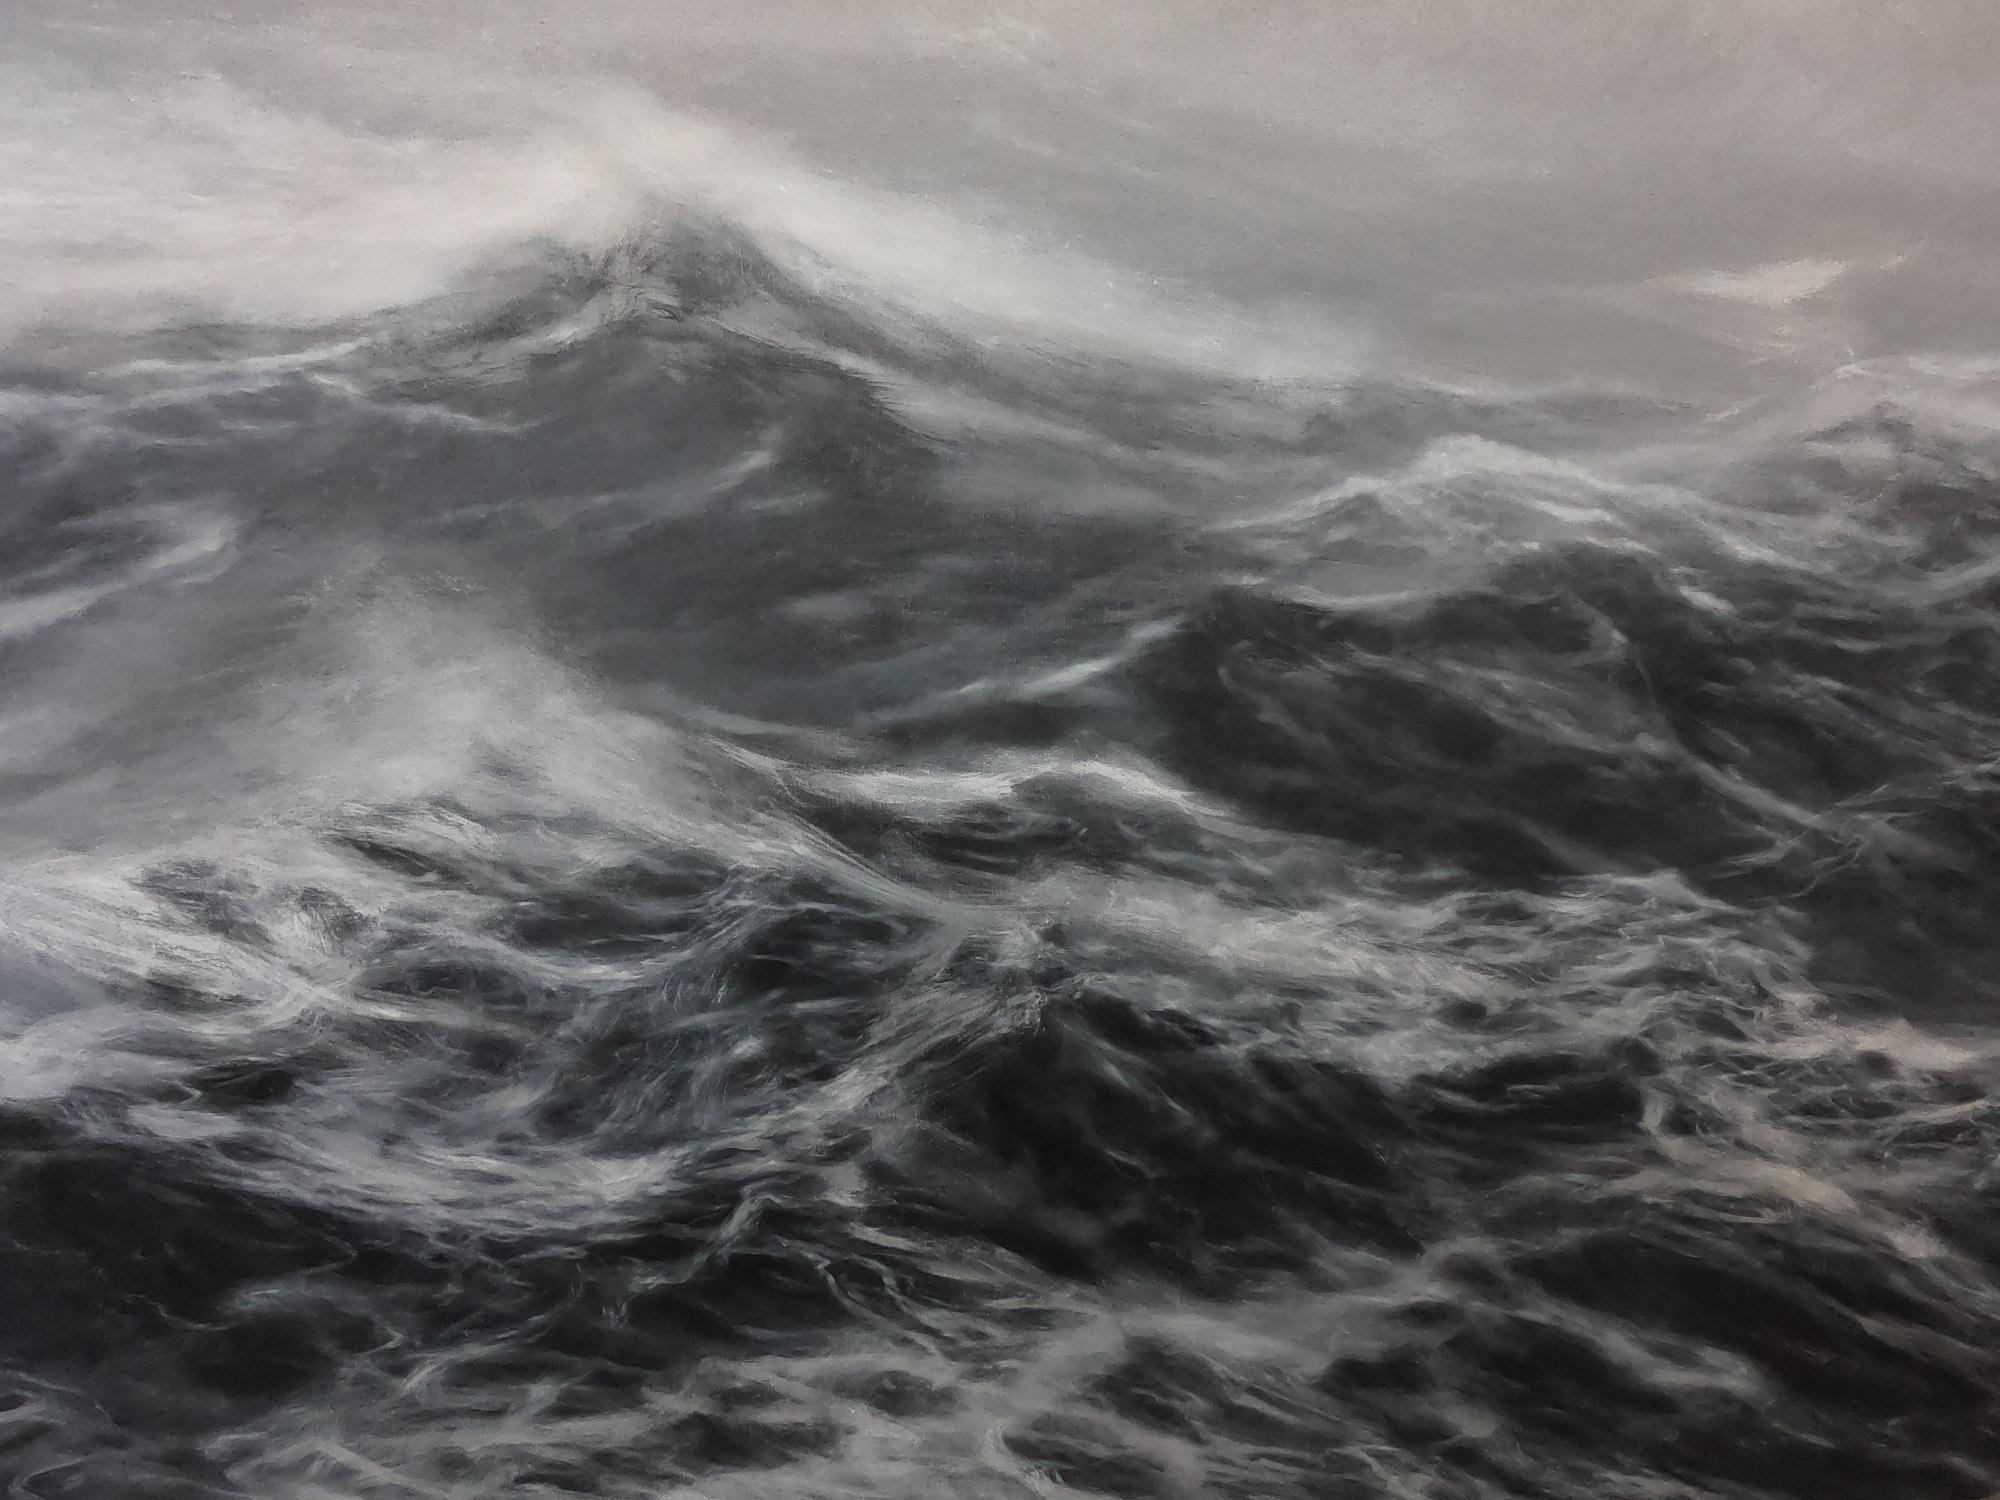 The Kingdom of the Wind - Seascape painting, Ocean waves, Large canvas - Contemporary Painting by Franco Salas Borquez